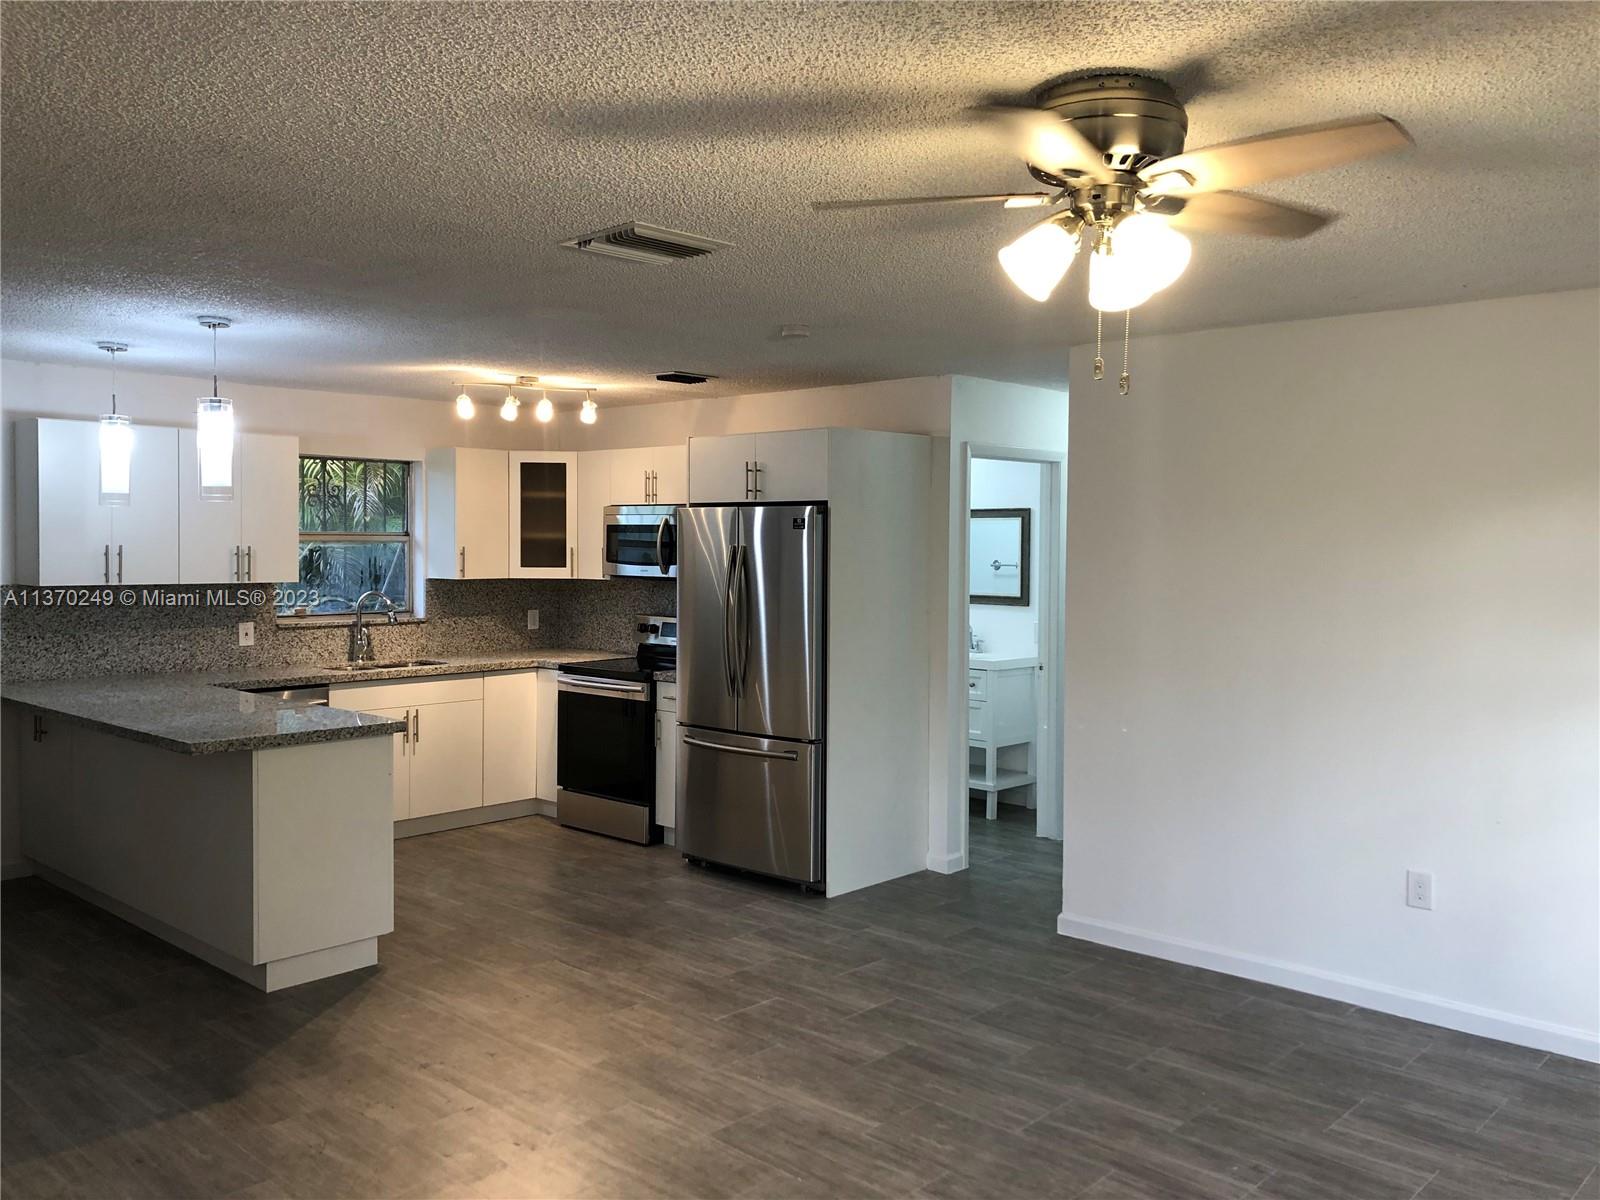 a kitchen with stainless steel appliances kitchen island granite countertop a refrigerator a sink dishwasher a stove and a dining table with wooden floor